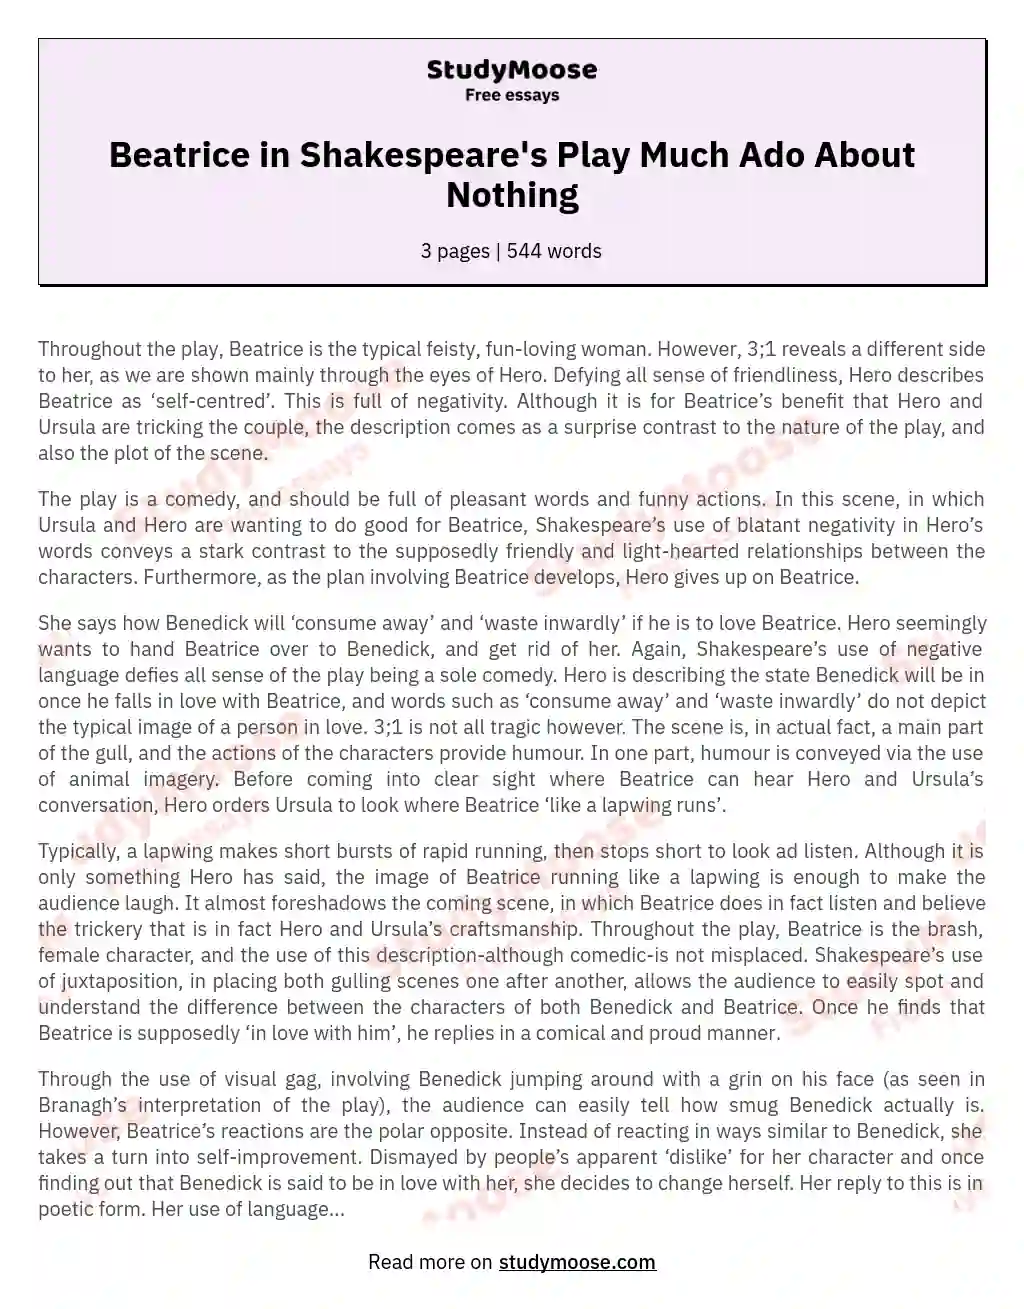 Beatrice in Shakespeare's Play Much Ado About Nothing